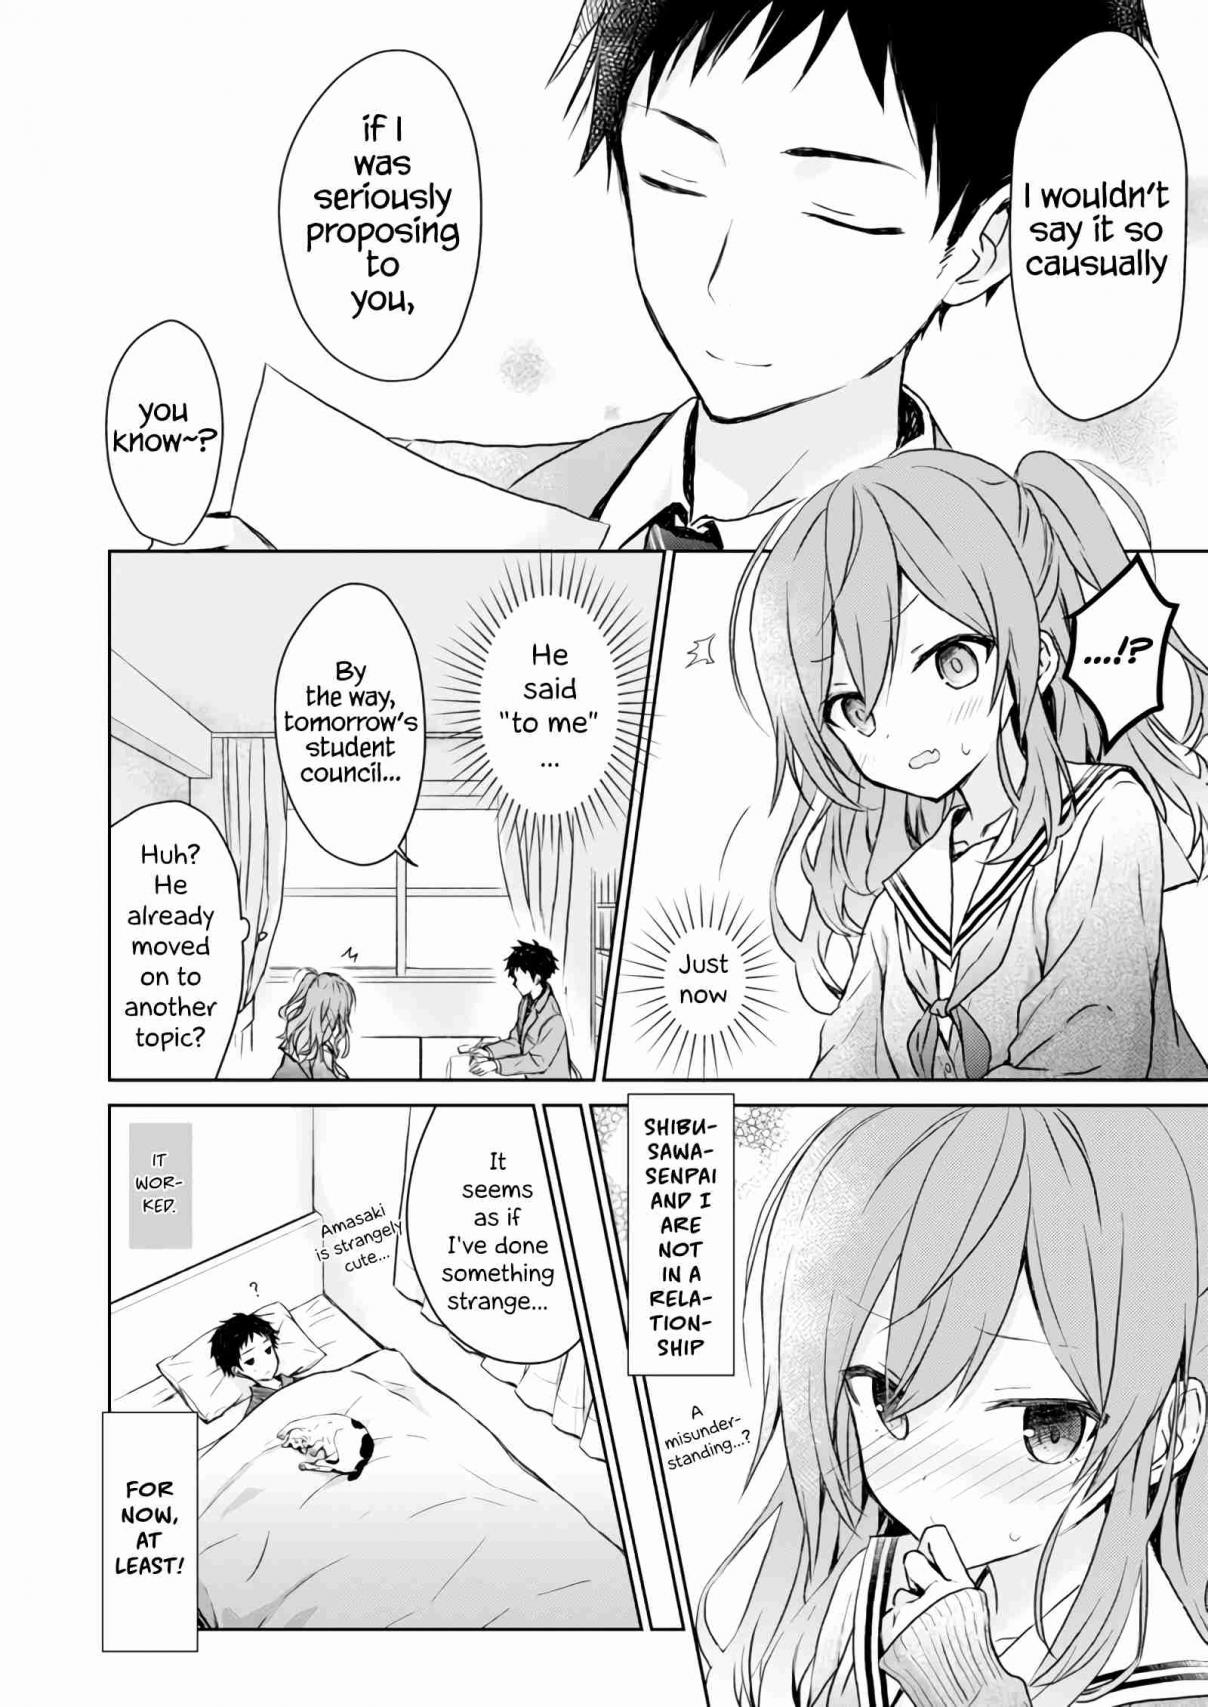 My Senpai and I Are Not in a Relationship Oneshot